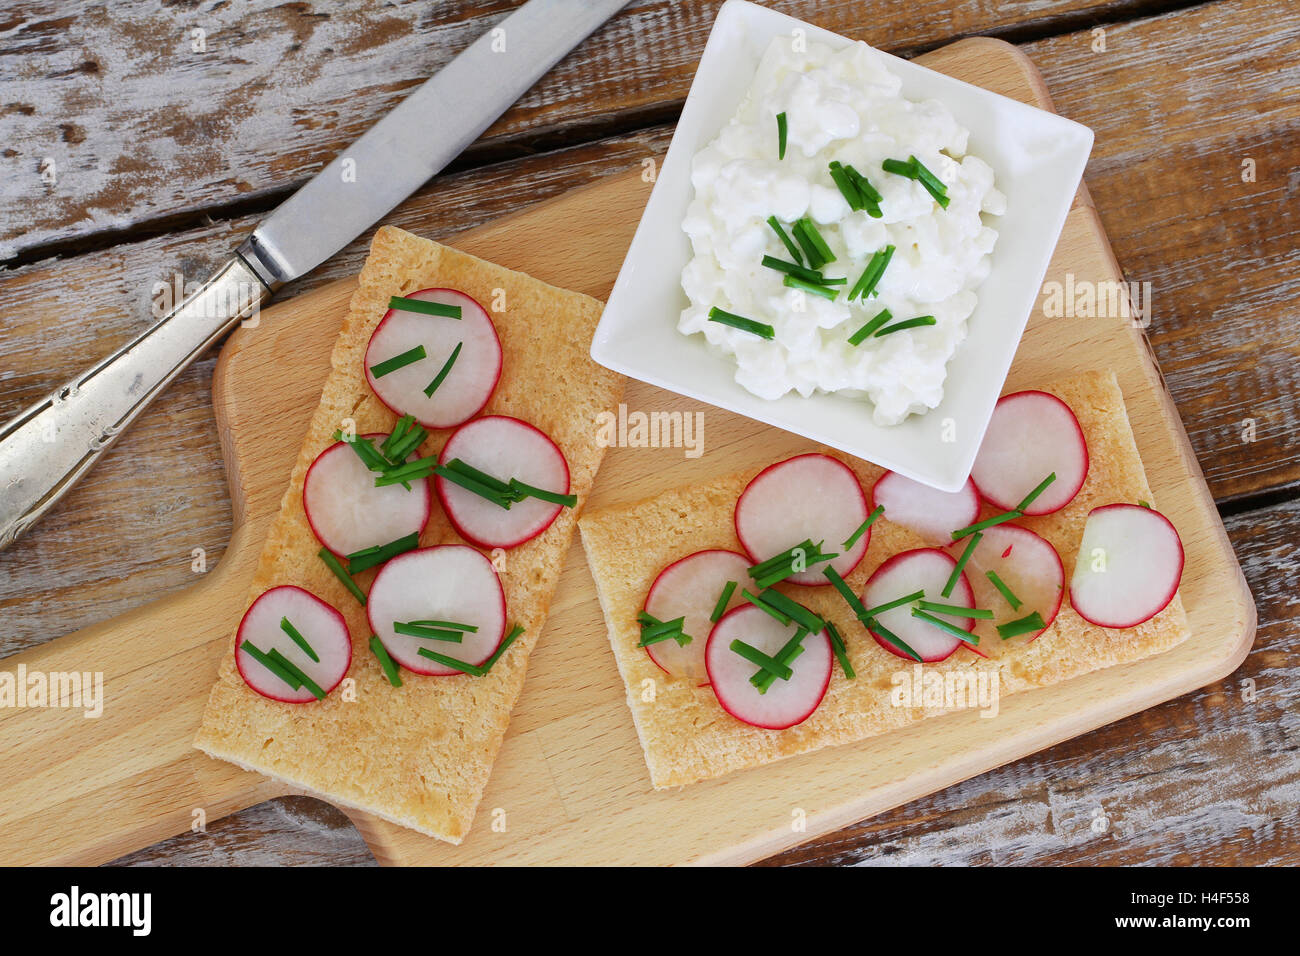 Breakfast consisting of crisp bread with fresh radish and bowl of cottage cheese Stock Photo